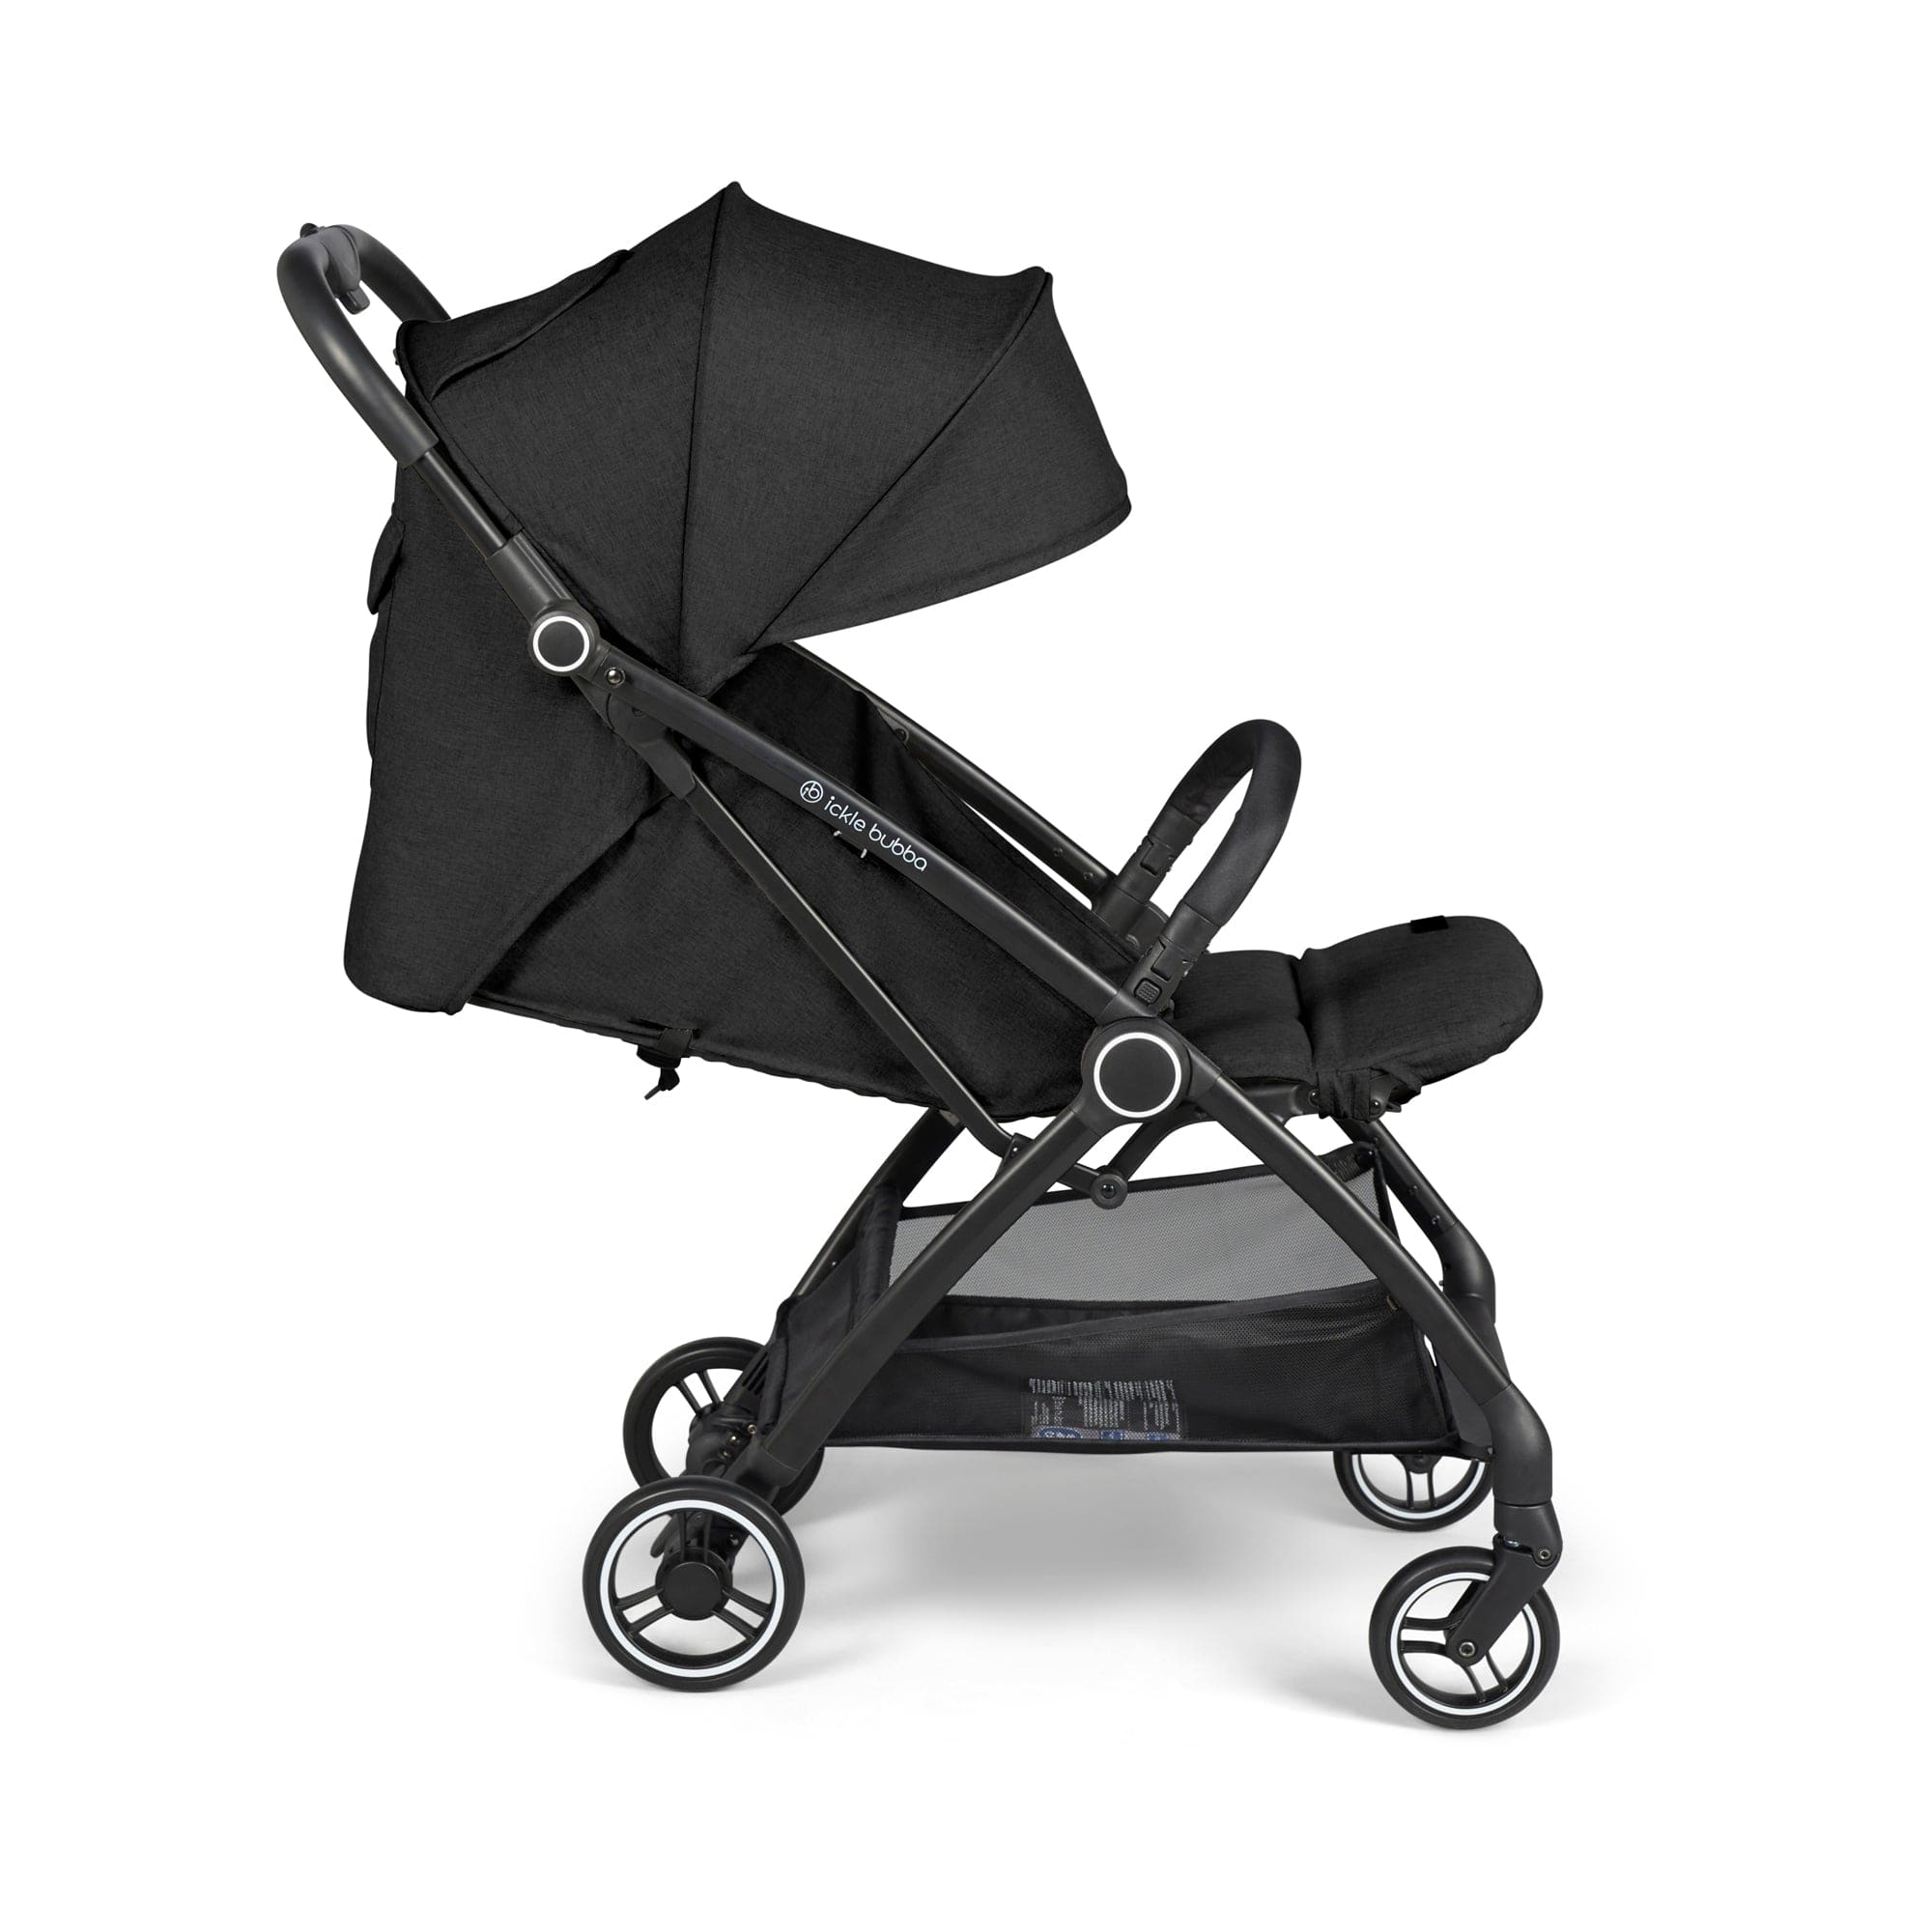 Ickle Bubba Aries Prime Autofold Stroller in Black Pushchairs & Buggies 15-005-300-001 5056515030648